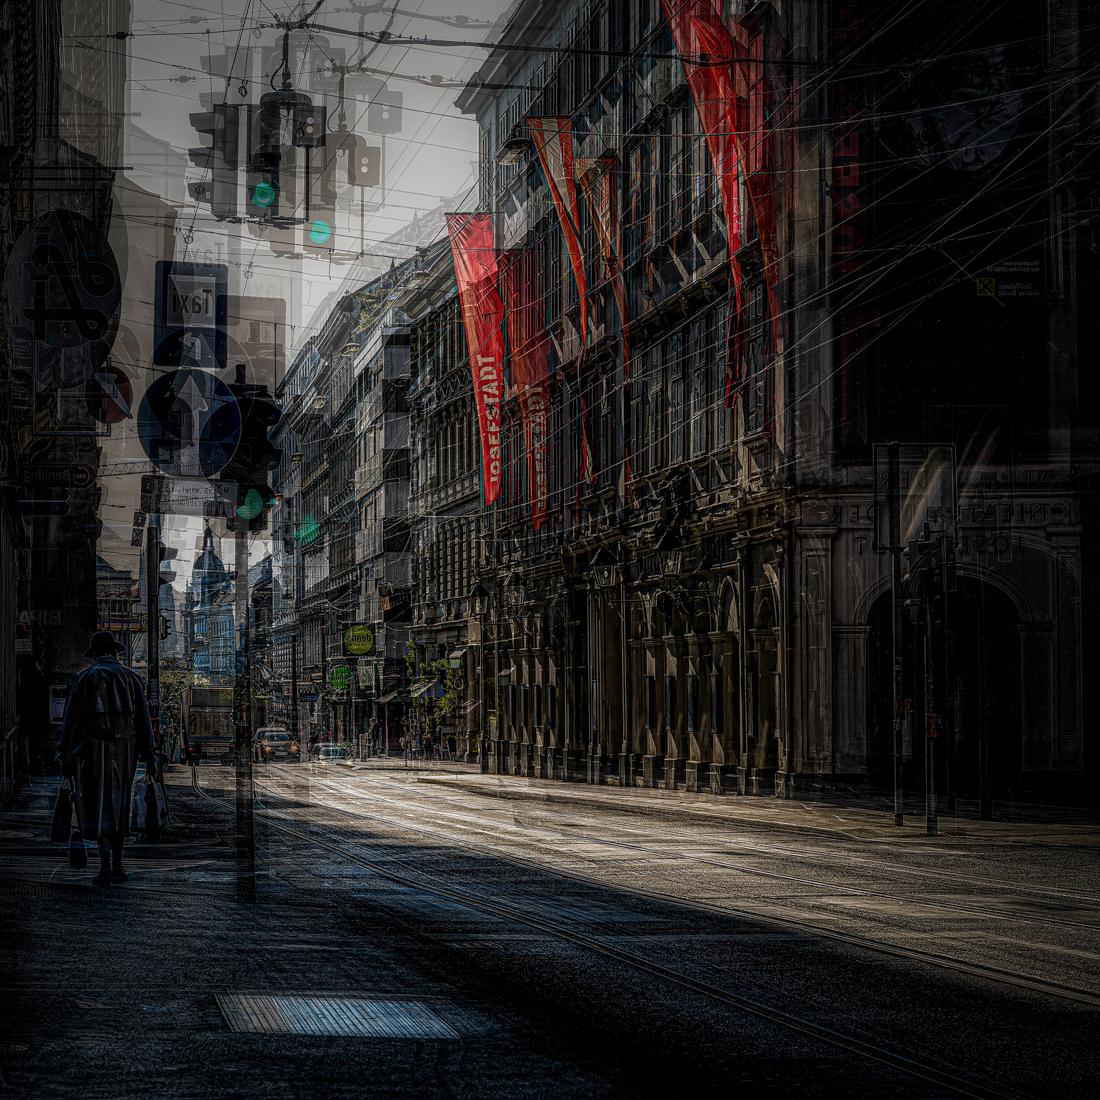 Streets of Vienna, my vision